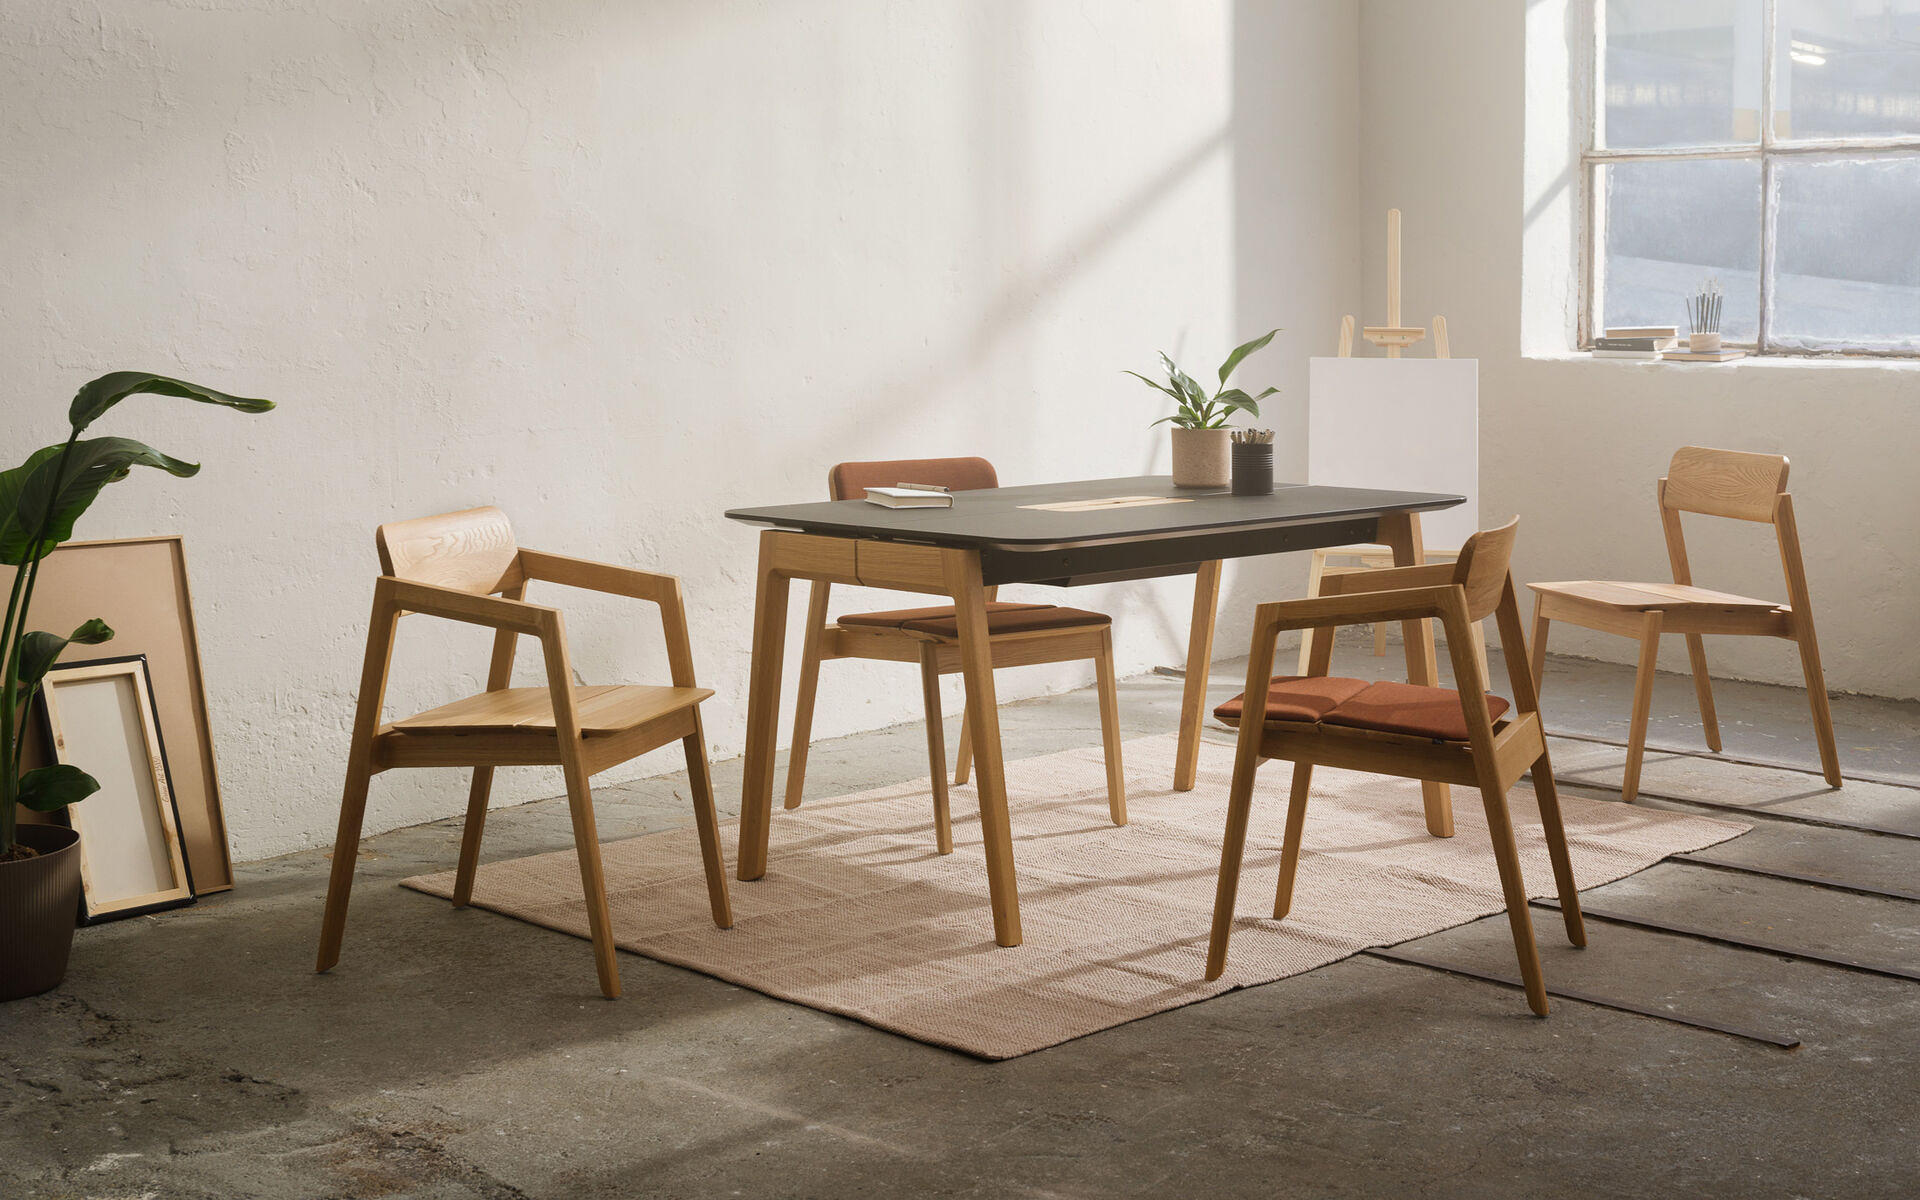 Knekk Table by Jon Fauske for Fora Form